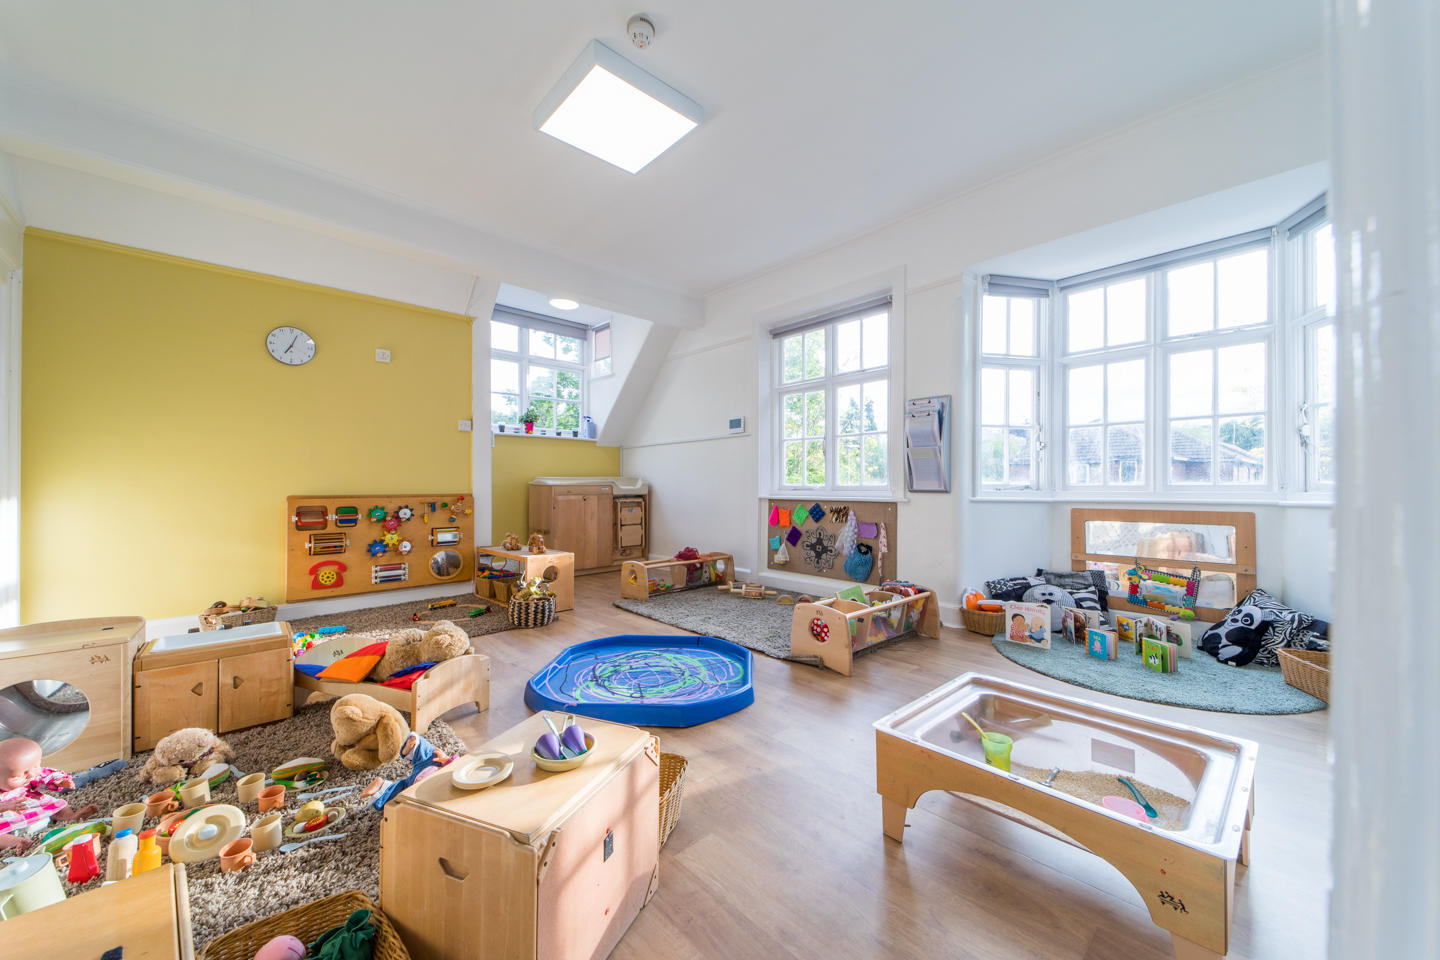 Images Bright Horizons The Park Day Nursery and Preschool